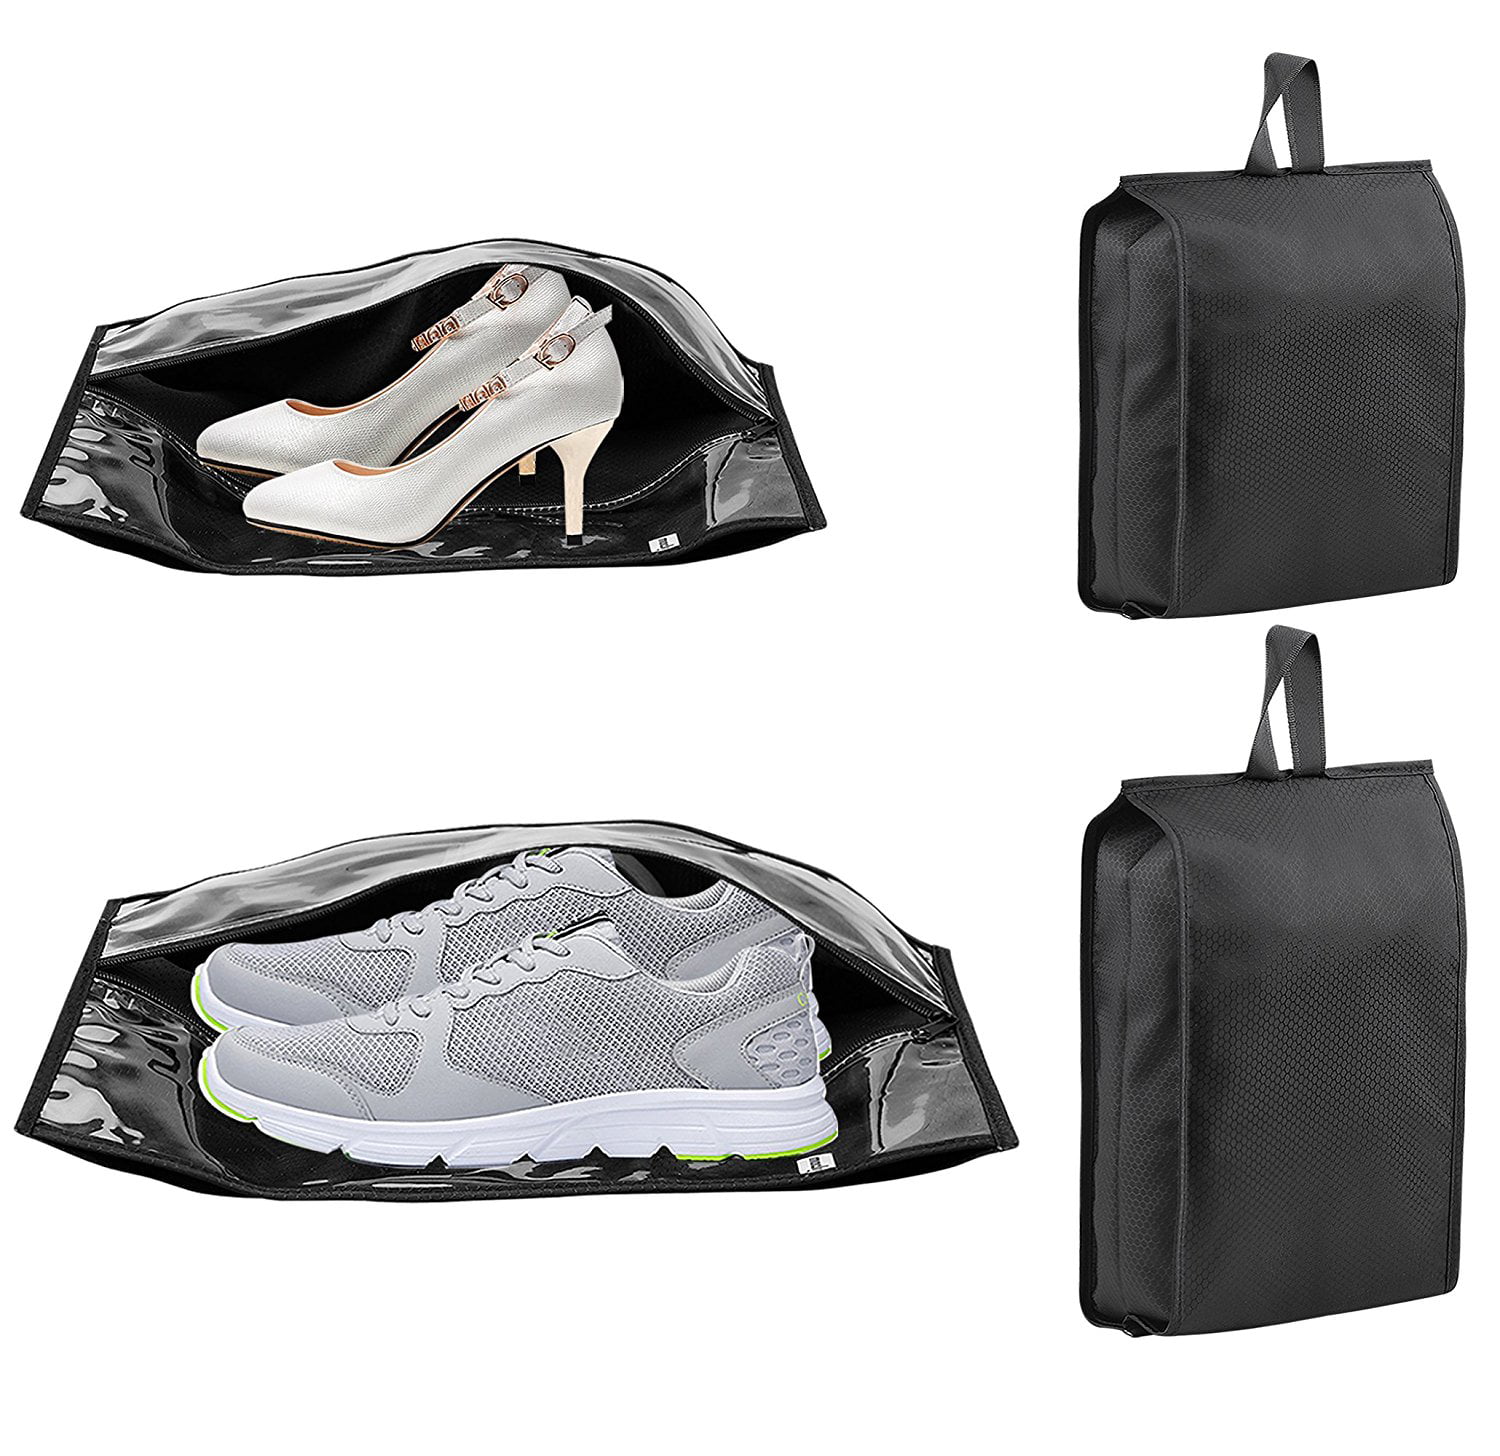 Shoe Storage Organizer Bags Travel Shoe Bags Portable Nylon Shoe Bag Case Organizer Shoe Storage Pouch for Men and Women